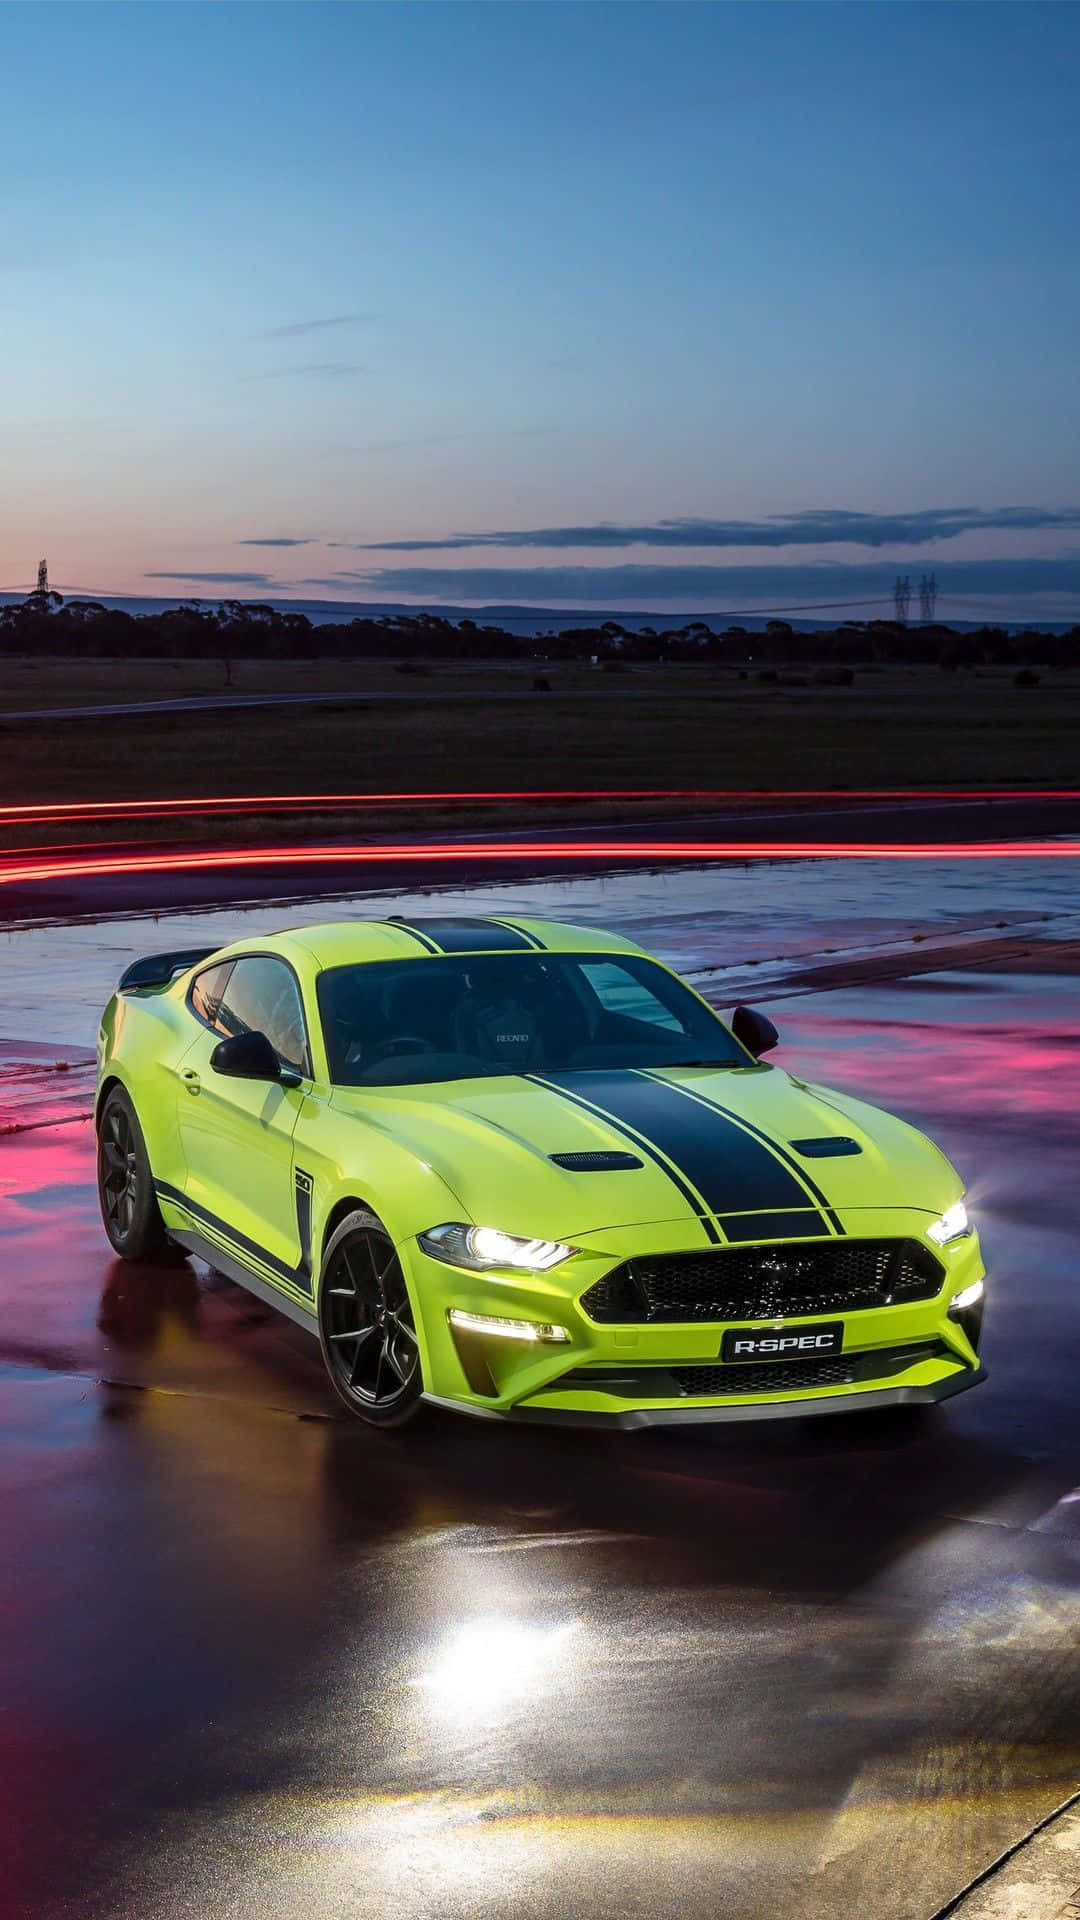 The 2019 Ford Mustang Gt Is Driving On A Wet Road Wallpaper